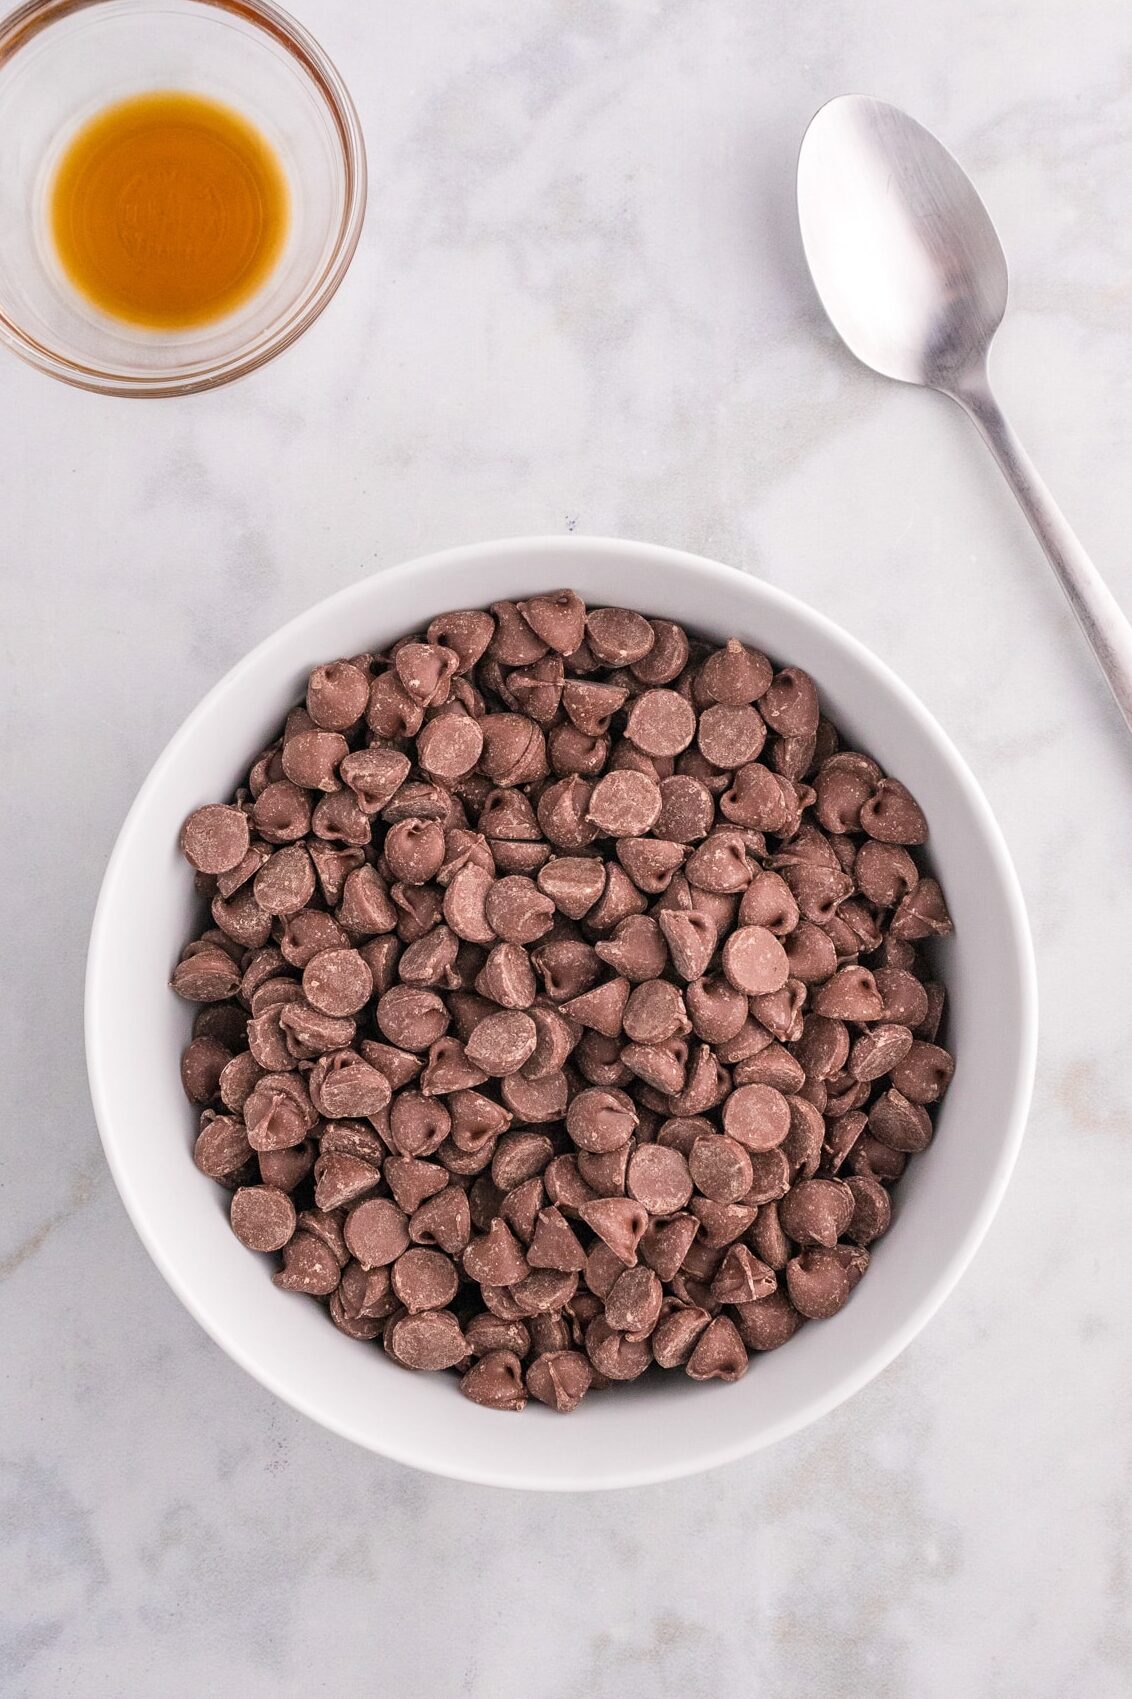 Chocolate chips in a bowl next to a small bowl of vanilla extract and a spoon.